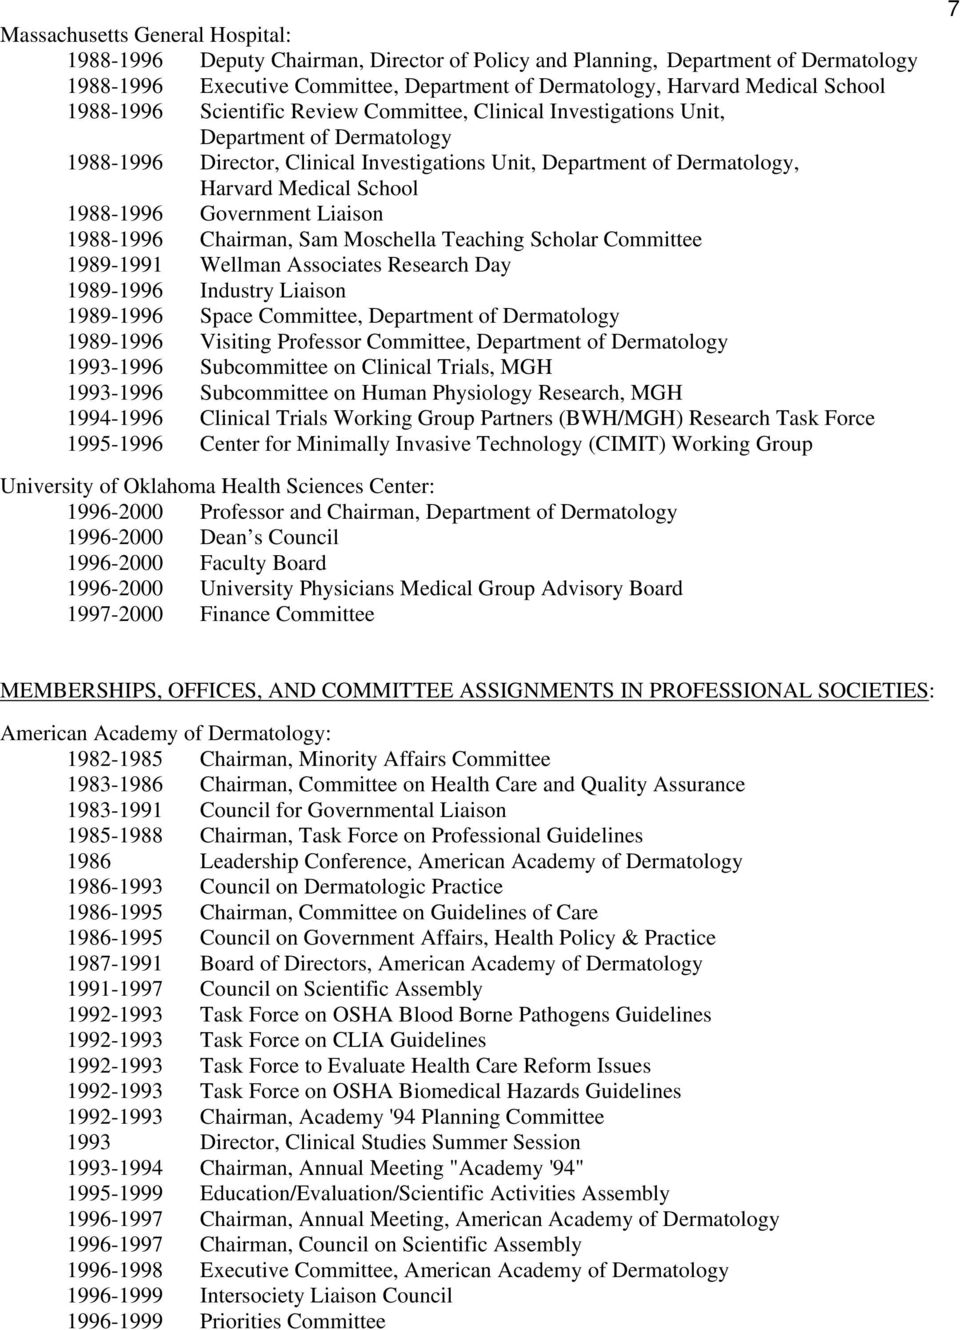 Wellman Associates Research Day 1989-1996 Industry Liaison 1989-1996 Space Committee, 1989-1996 Visiting Professor Committee, 1993-1996 Subcommittee on Clinical Trials, MGH 1993-1996 Subcommittee on